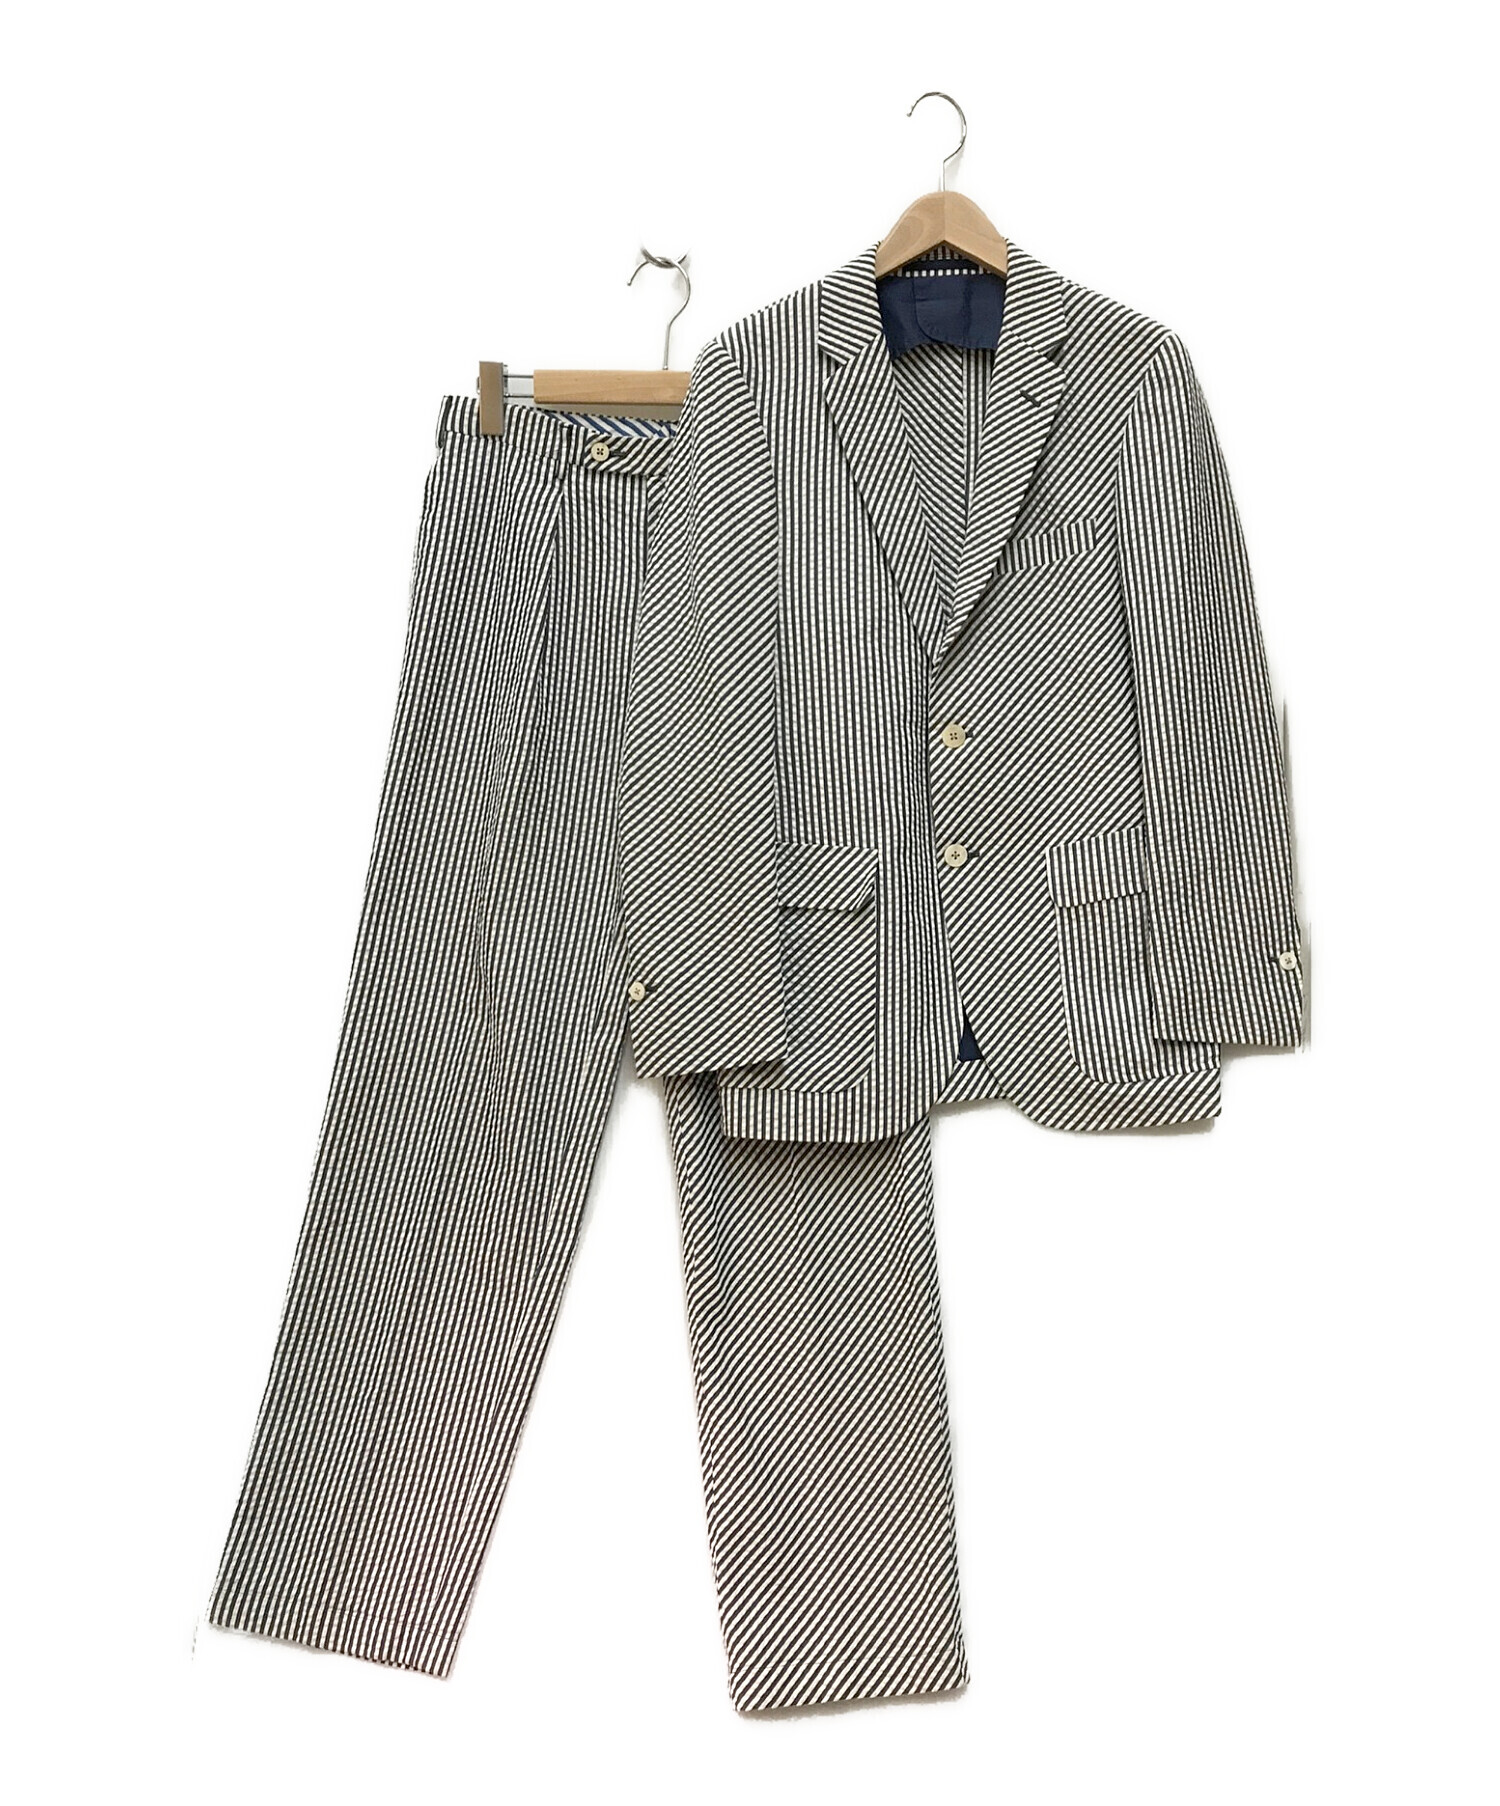 The FRANKLIN TAILORED セットアップ-